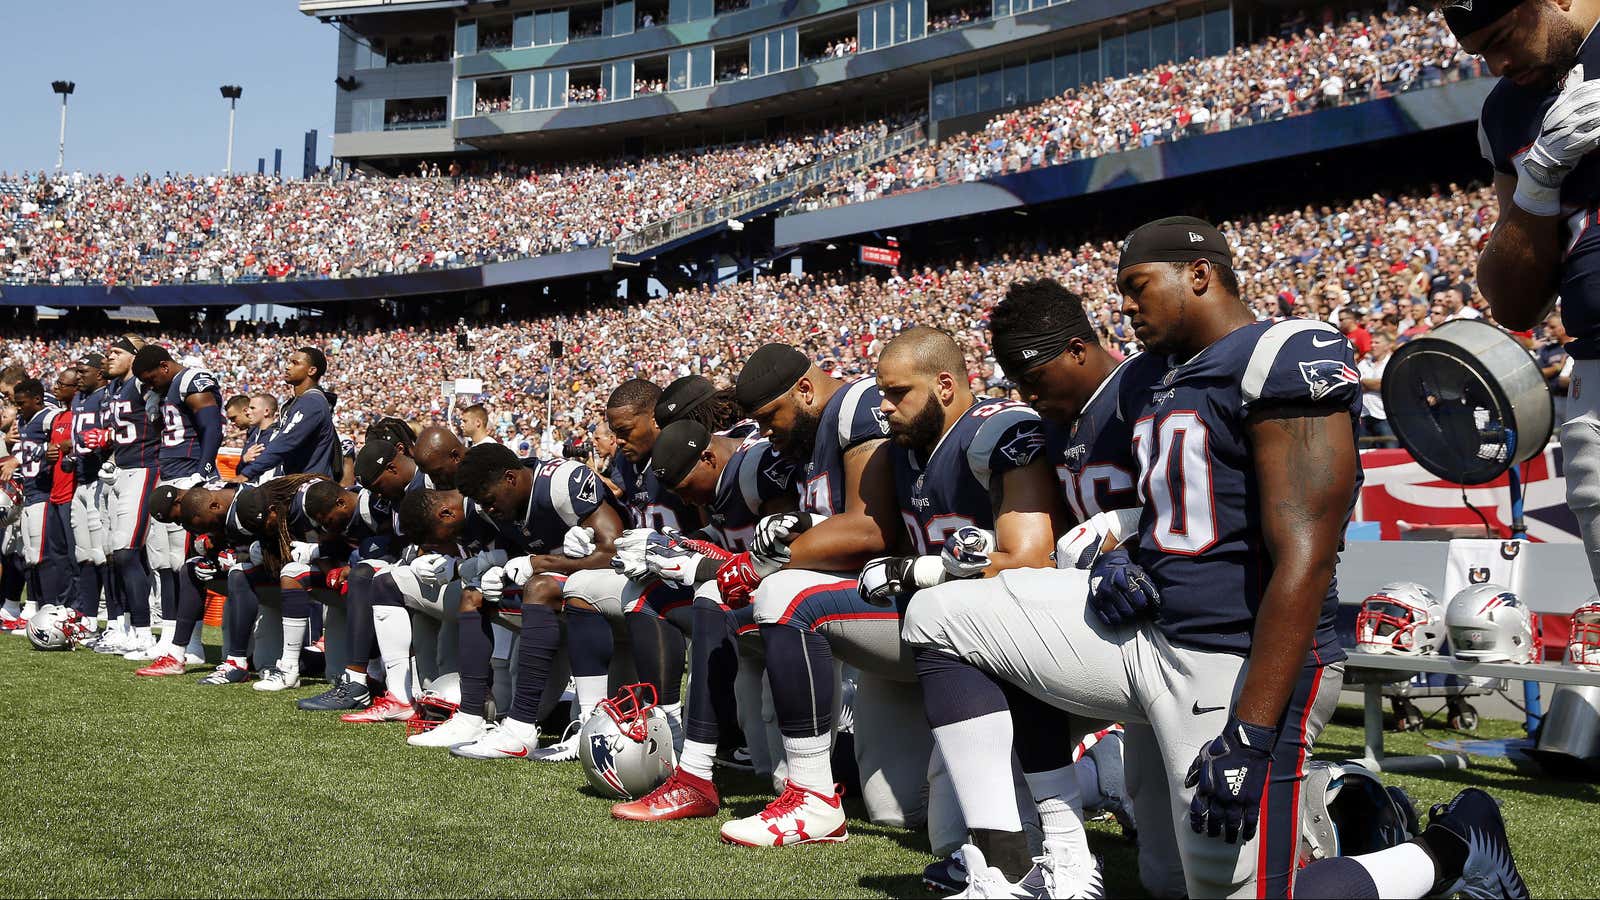 Members of the New England Patriots take a knee.